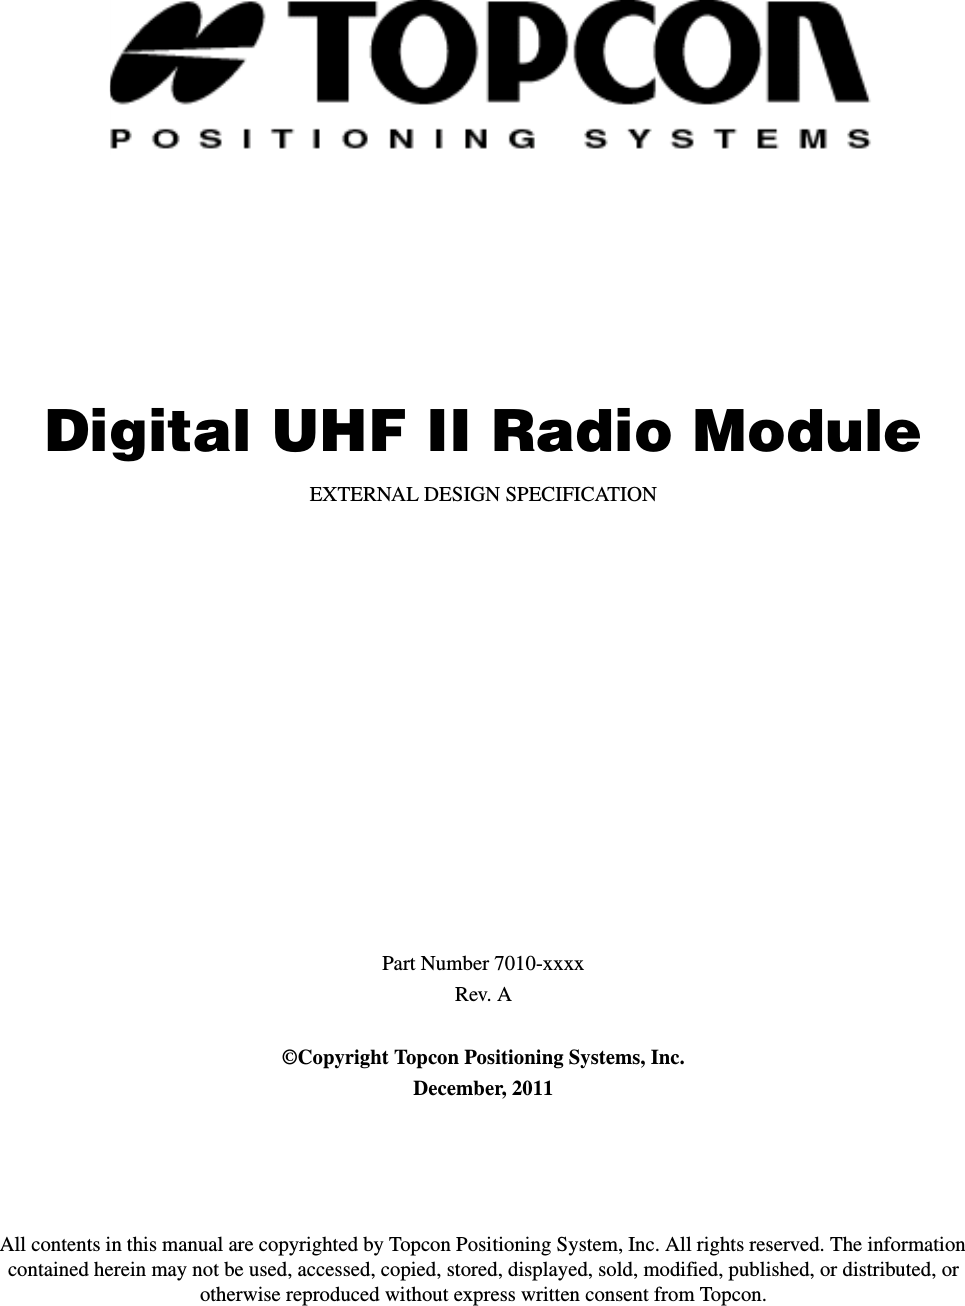 Digital UHF II Radio ModuleEXTERNAL DESIGN SPECIFICATIONPart Number 7010-xxxxRev. A©Copyright Topcon Positioning Systems, Inc.December, 2011All contents in this manual are copyrighted by Topcon Positioning System, Inc. All rights reserved. The information contained herein may not be used, accessed, copied, stored, displayed, sold, modified, published, or distributed, or otherwise reproduced without express written consent from Topcon.